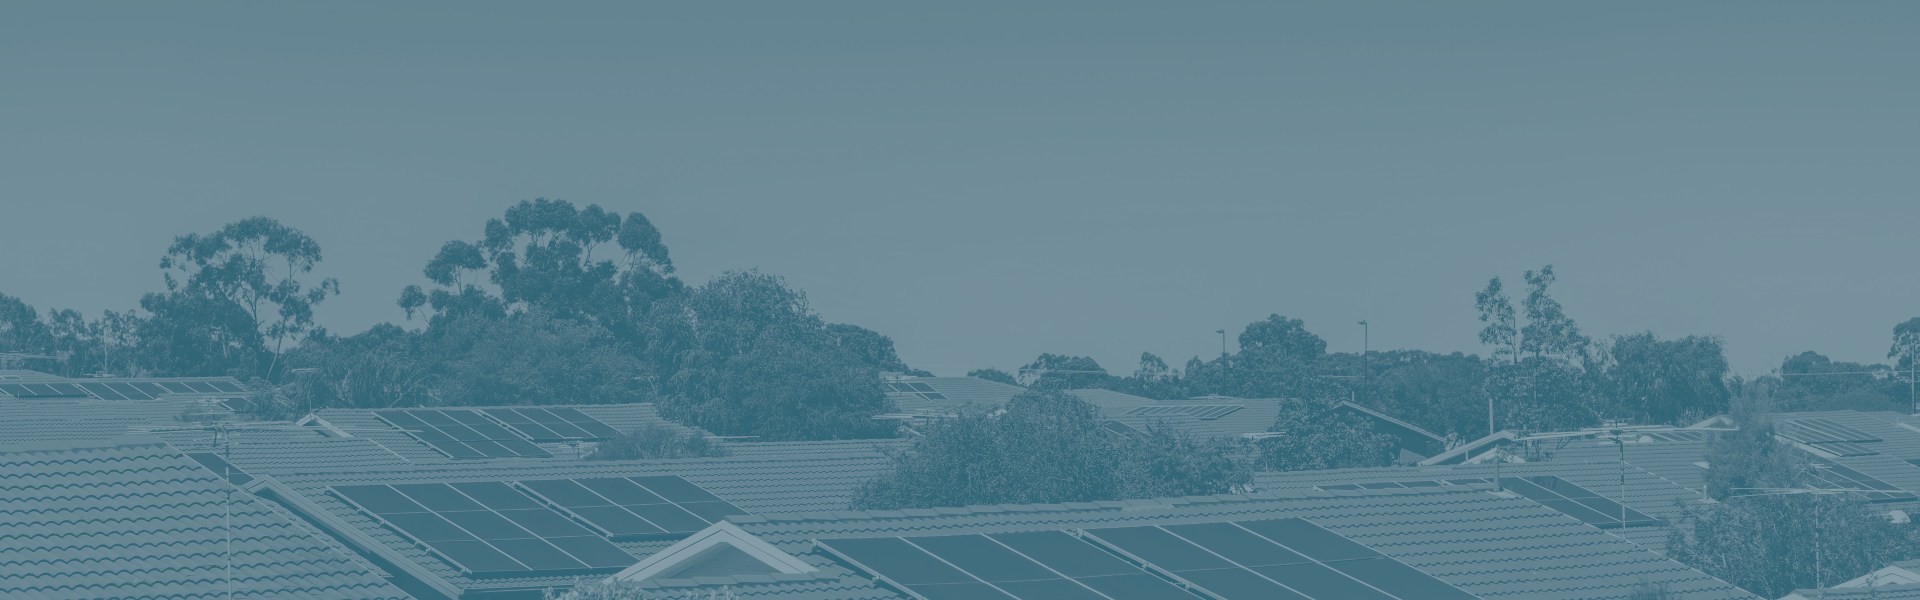 Australian home roof tops with multiple solar panels installed.